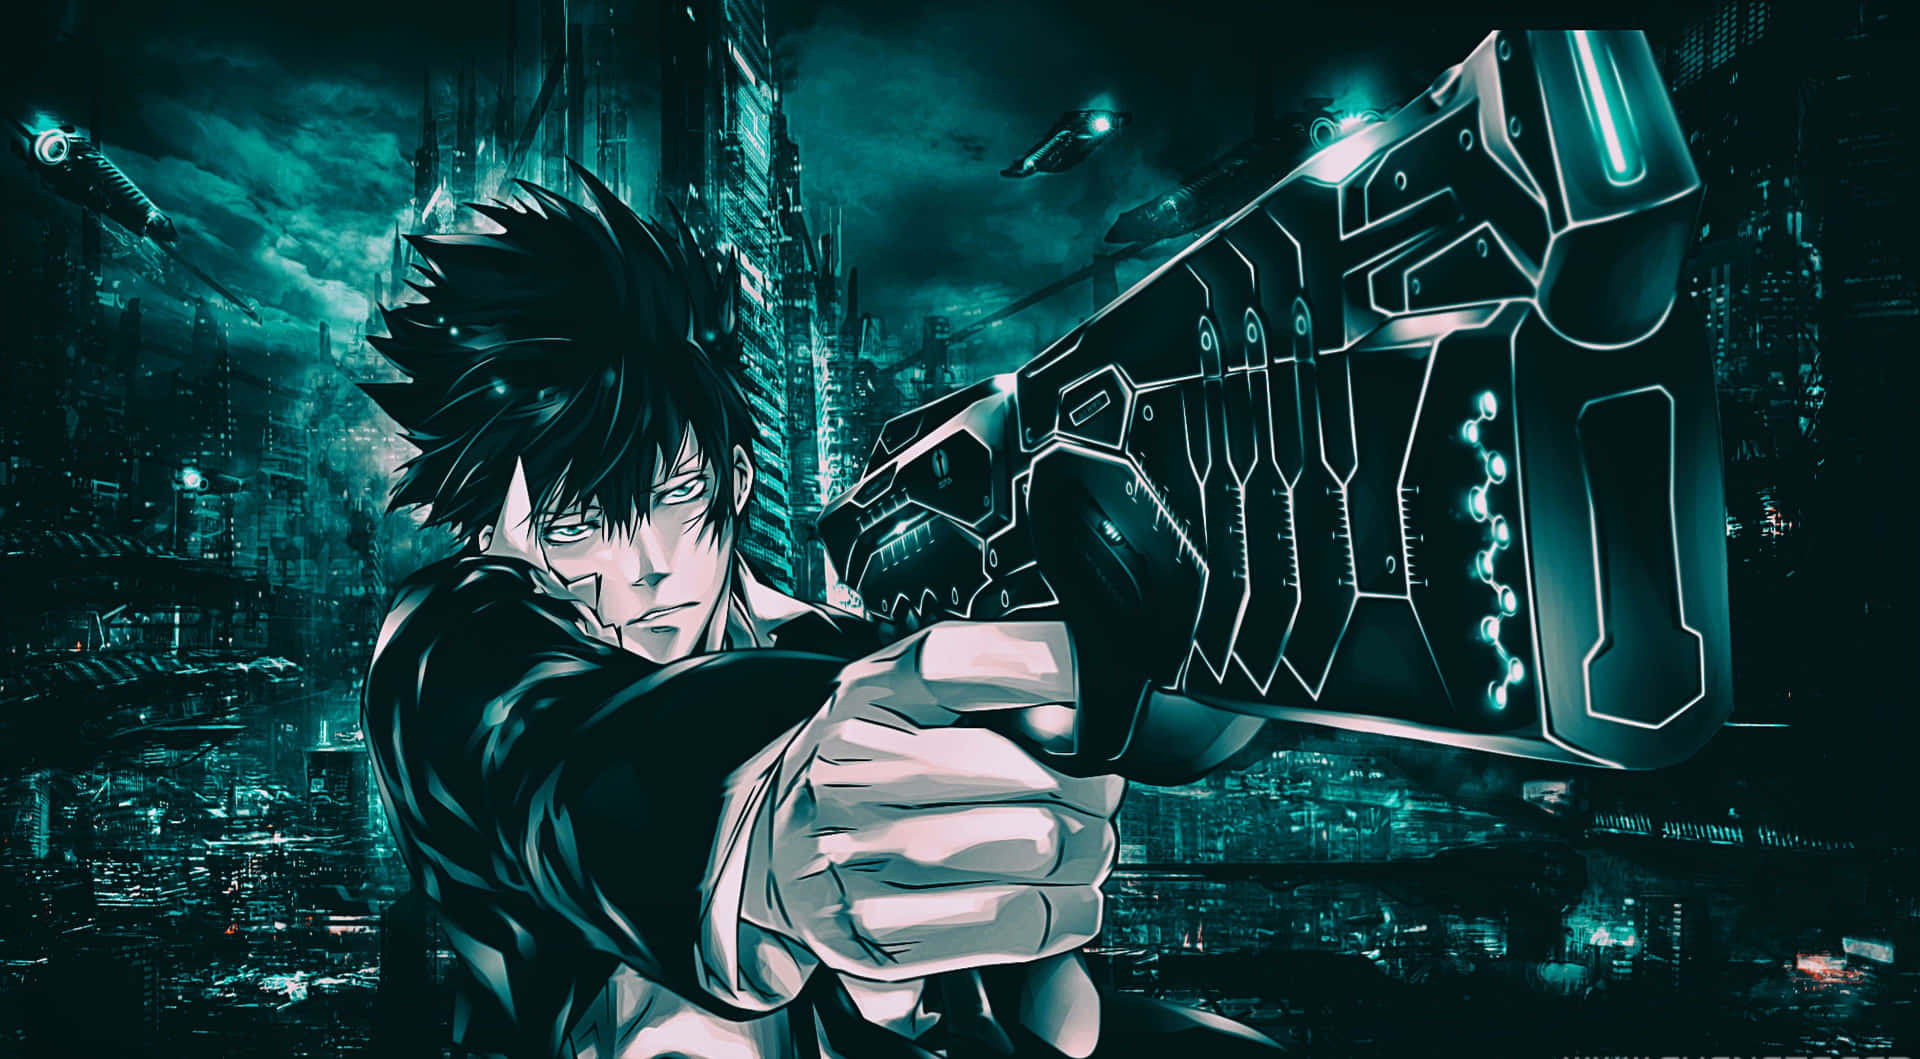 Shinya Kogami with a fierce expression against a dystopian city backdrop Wallpaper